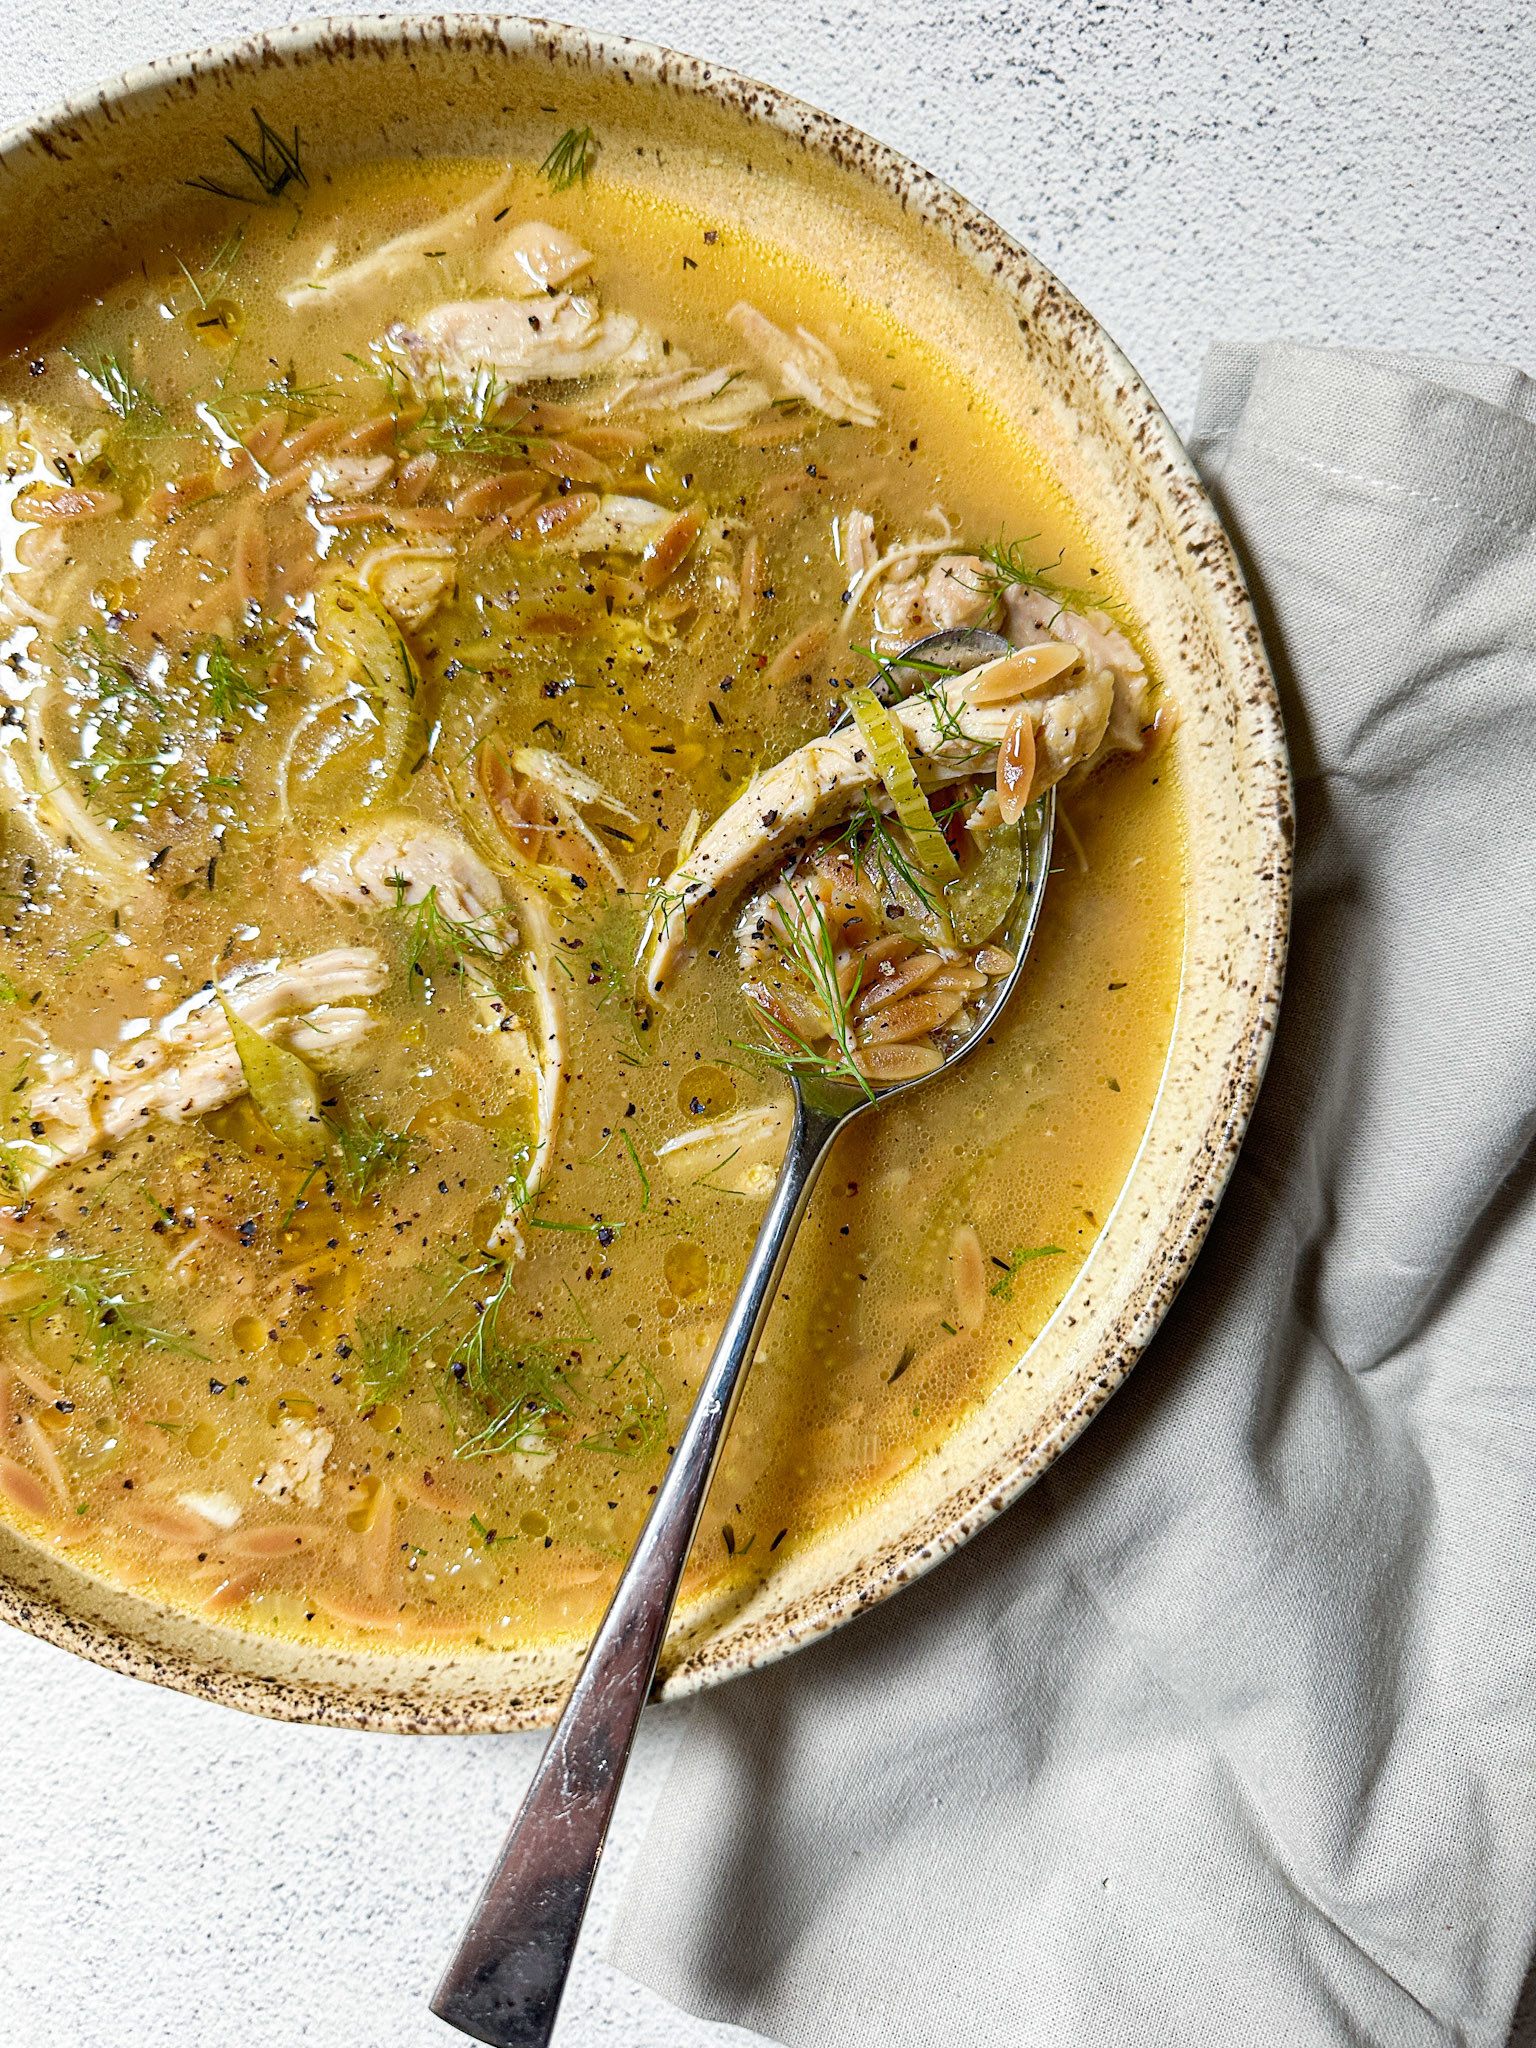 plated bowl of soup with brown, toasted orzo, shredded chicken, and fennel pieces in chicken broth